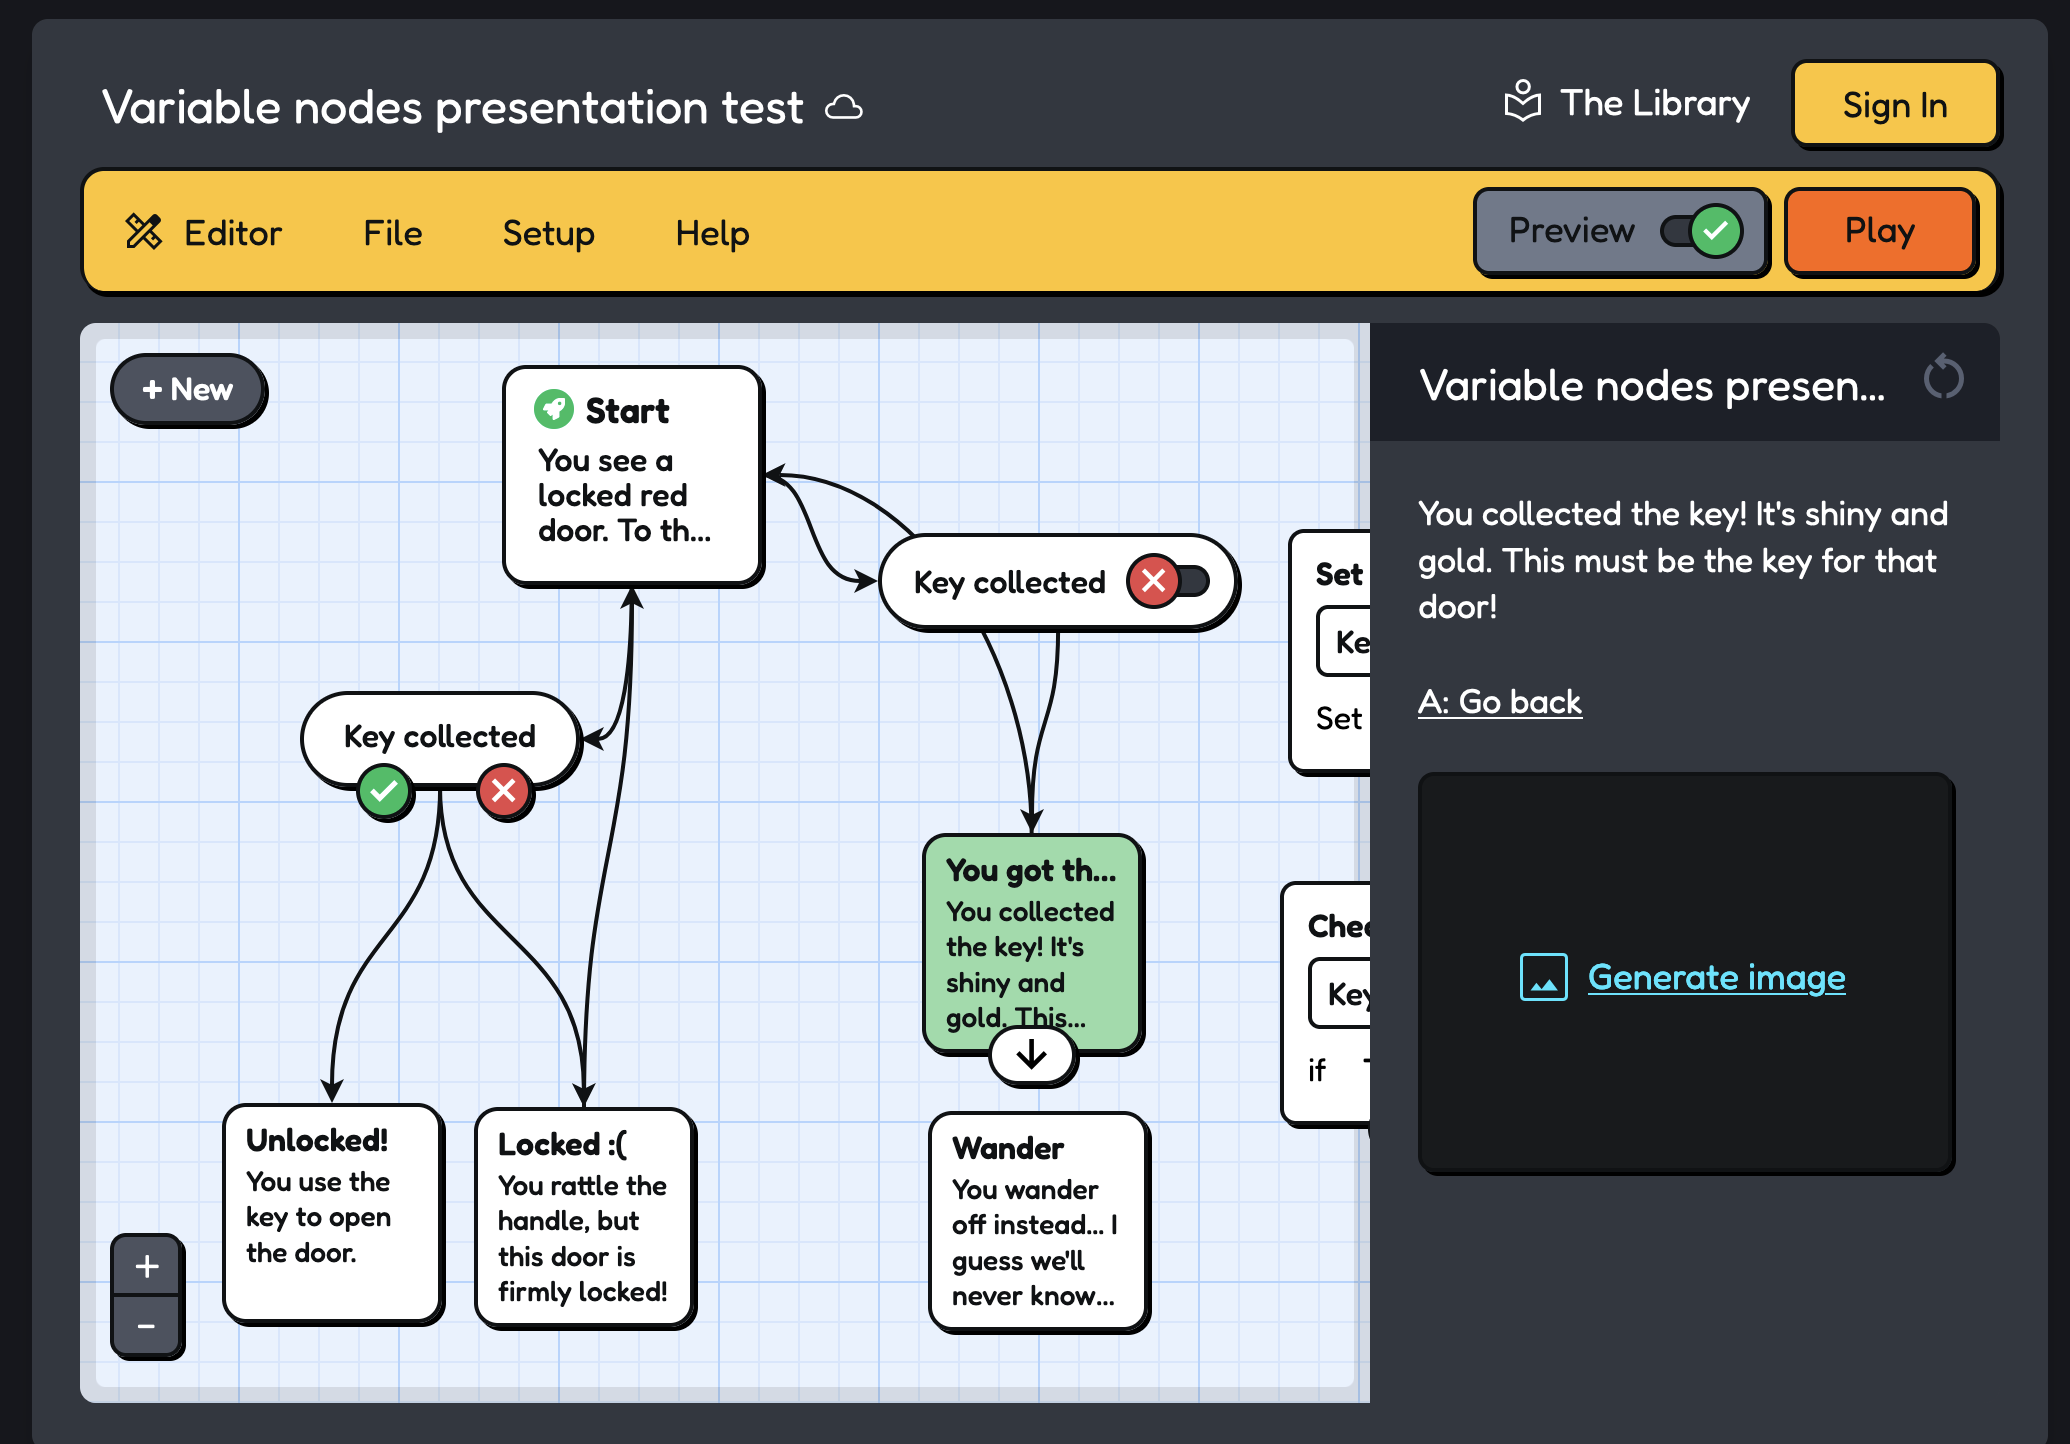 Screenshot of no-code Twine tool interface with node-based editor for conditional logic, showcasing a visual organization of storylines through connected nodes representing content or decision points.